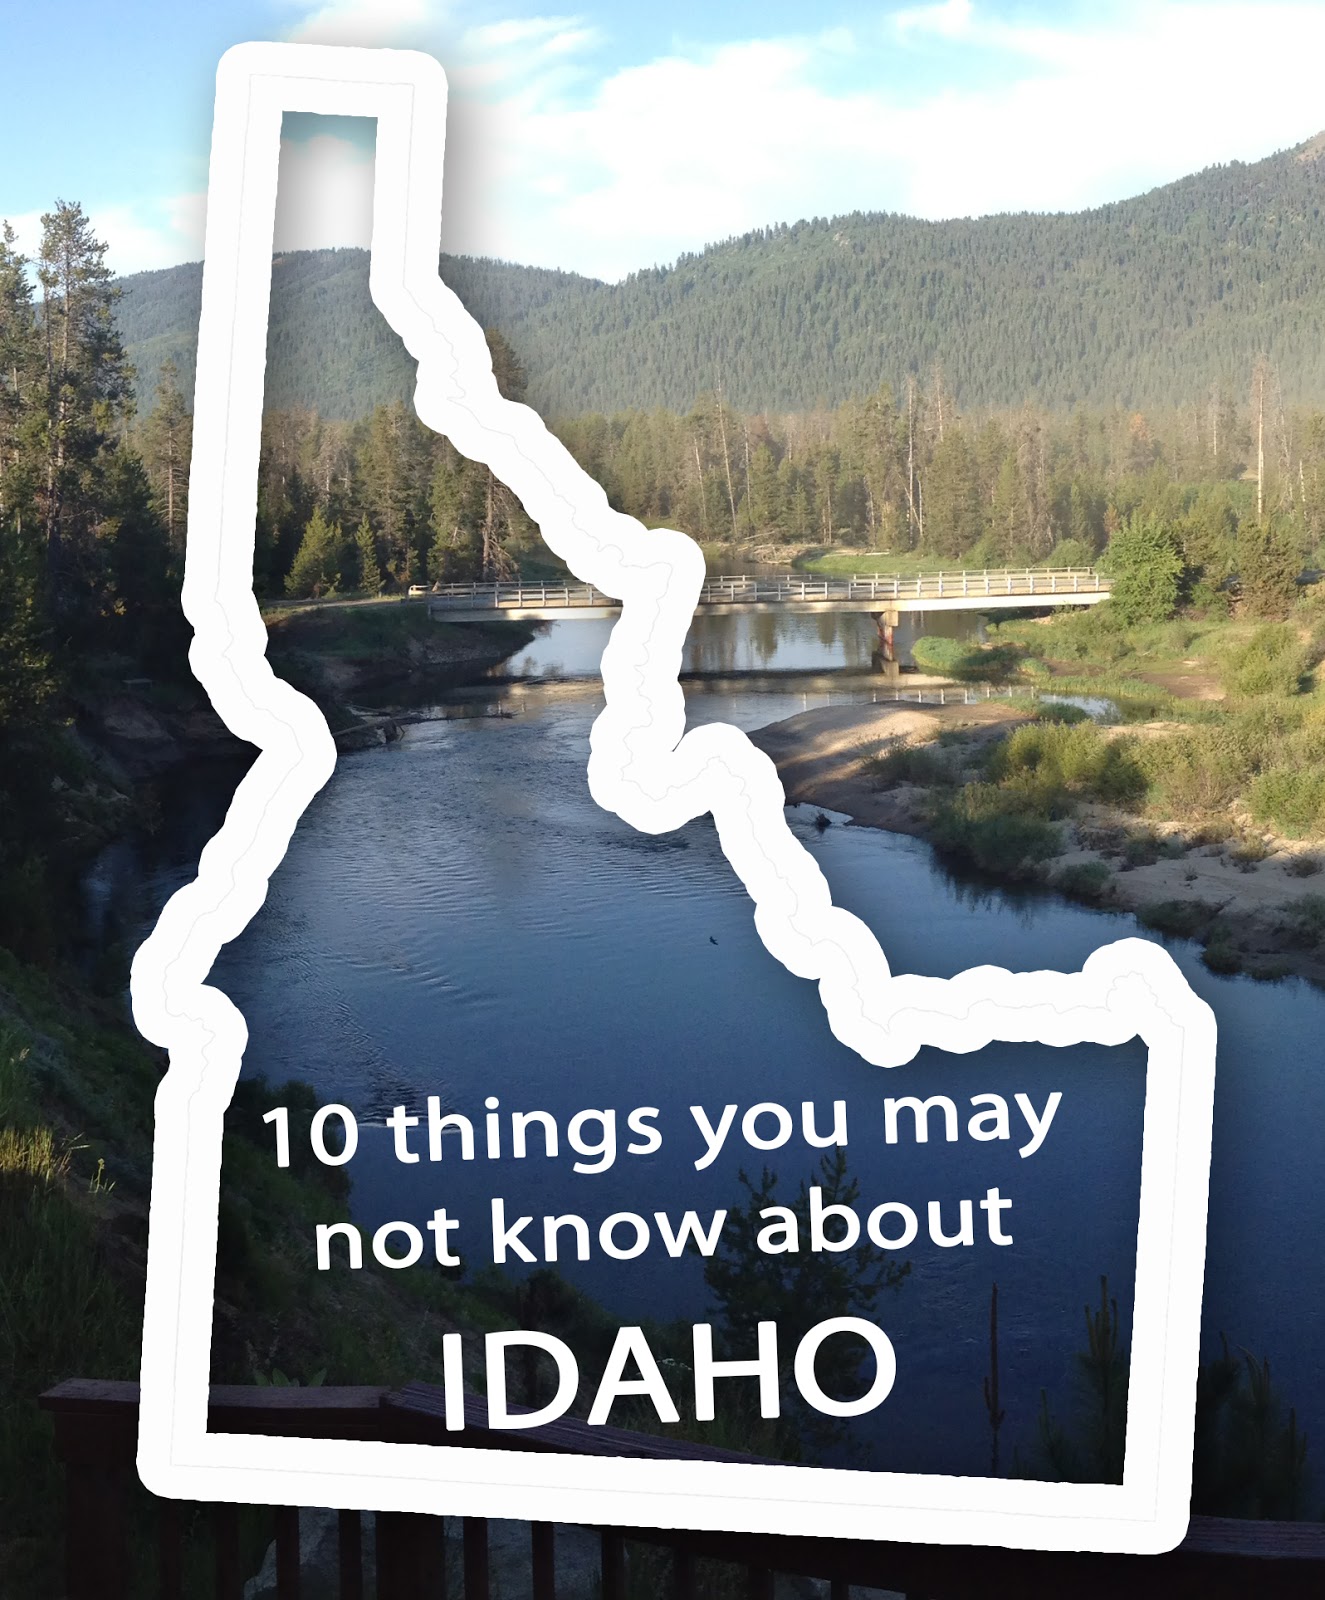 10 things about Idaho